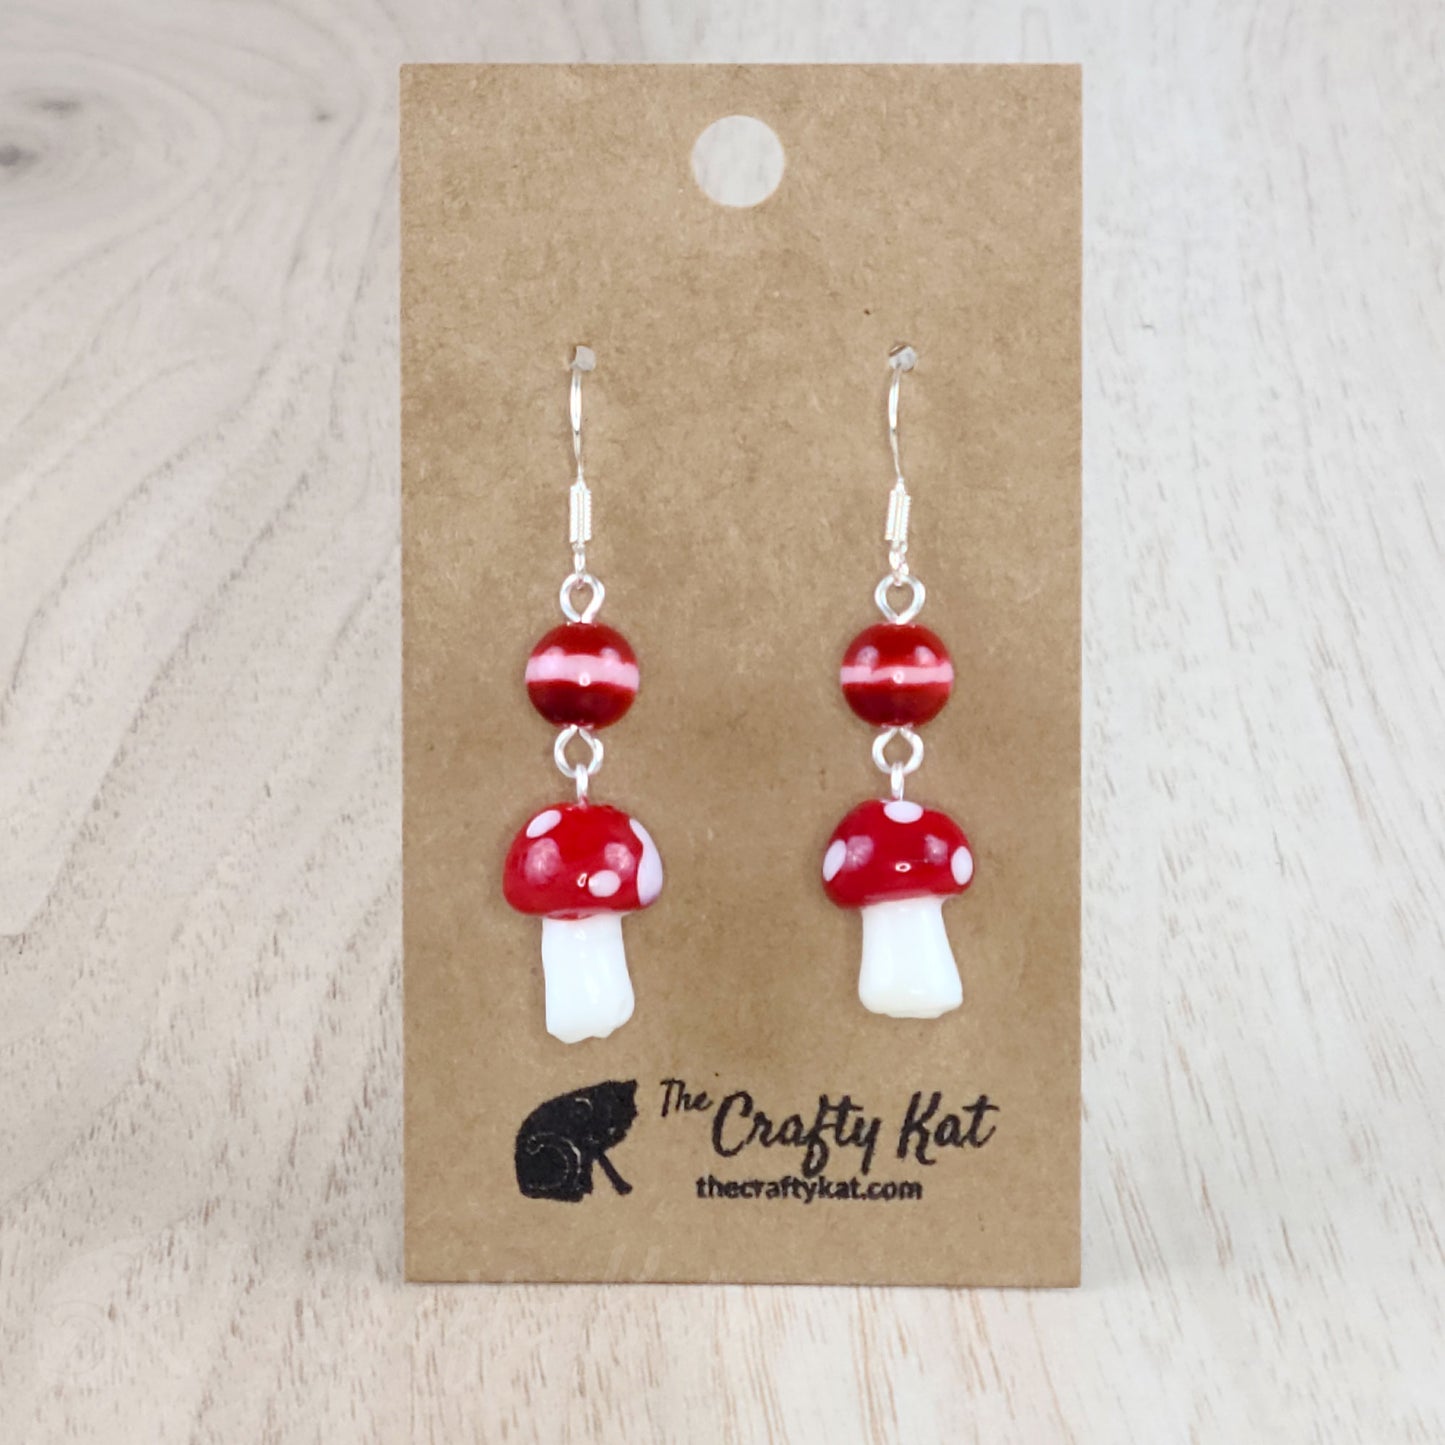 Mushroom-shaped tiered earrings made of lampwork and pressed glass beads with silver-plated base metal fittings. These mushrooms are red with white spots.